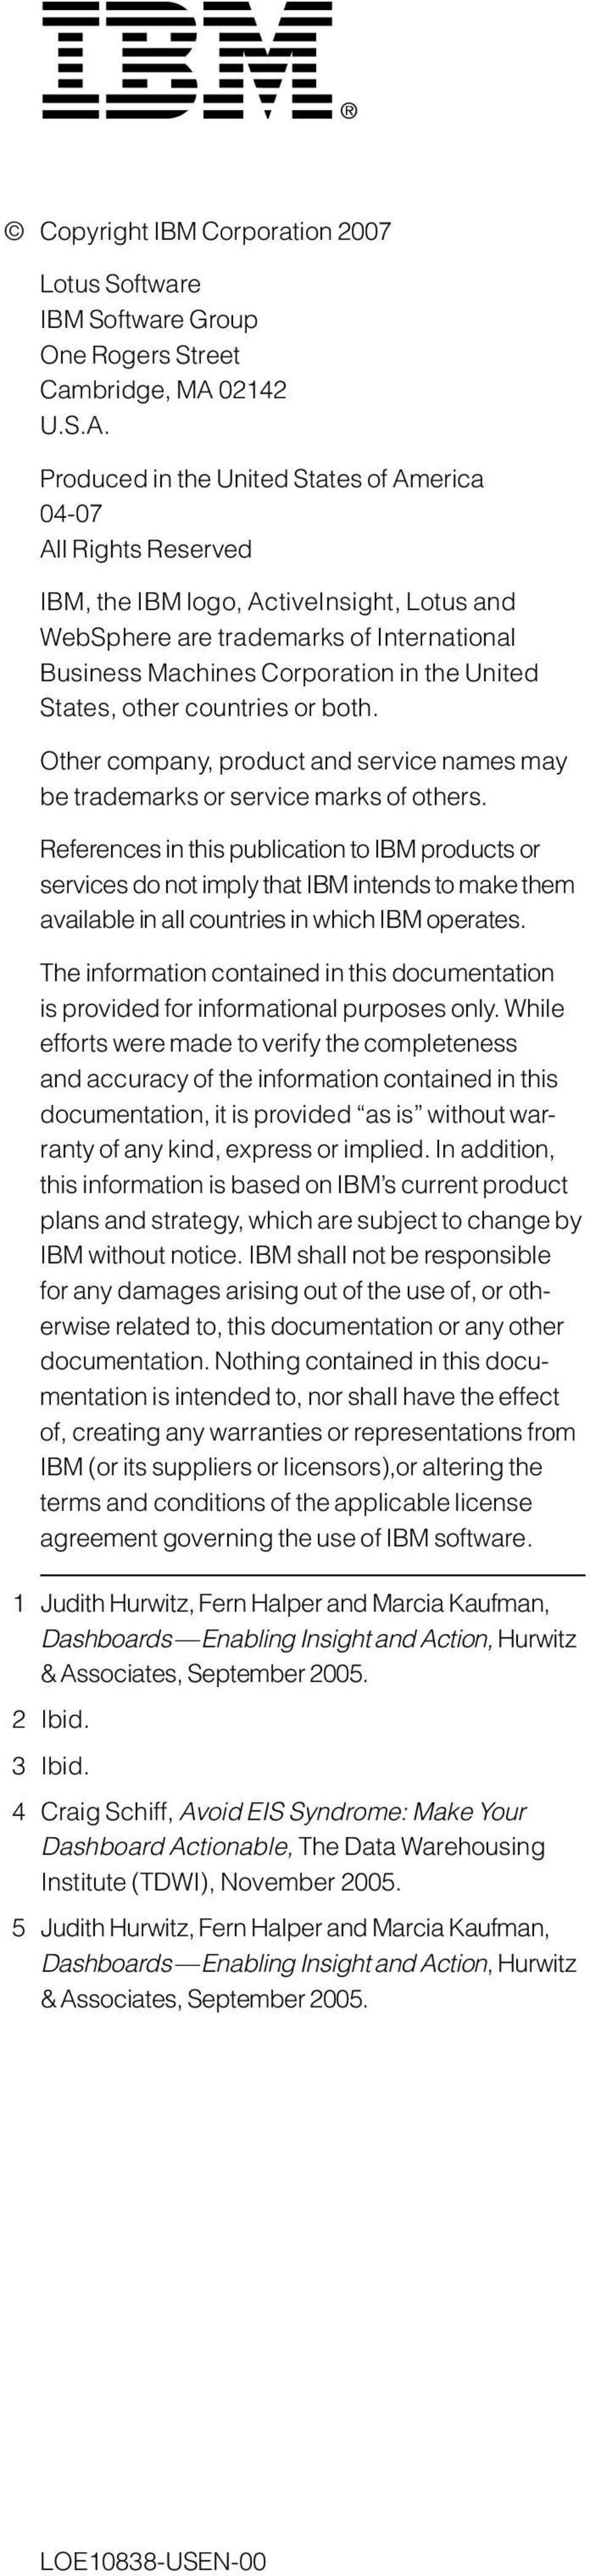 Produced in the United States of America 04-07 All Rights Reserved IBM, the IBM logo, ActiveInsight, Lotus and WebSphere are trademarks of International Business Machines Corporation in the United